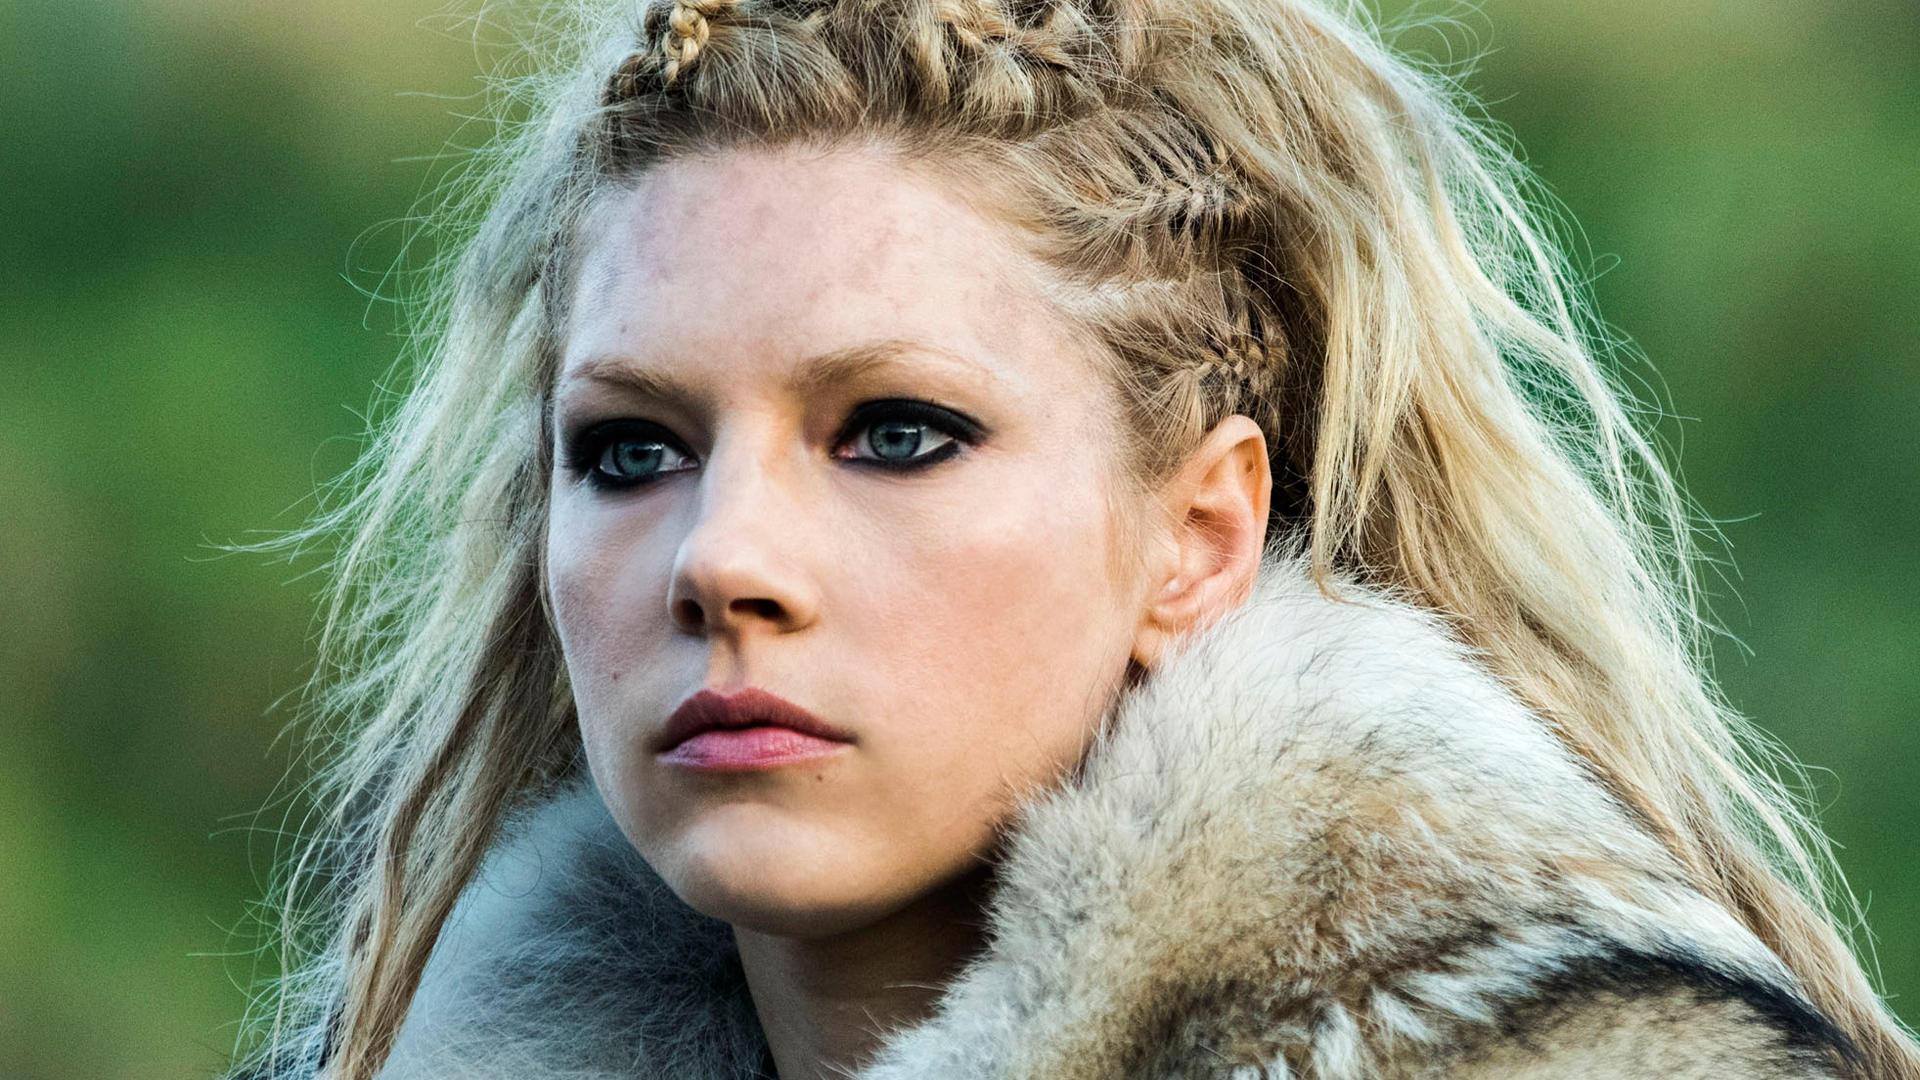 What The Cast Of Vikings Looks Like In Real Life Images, Photos, Reviews